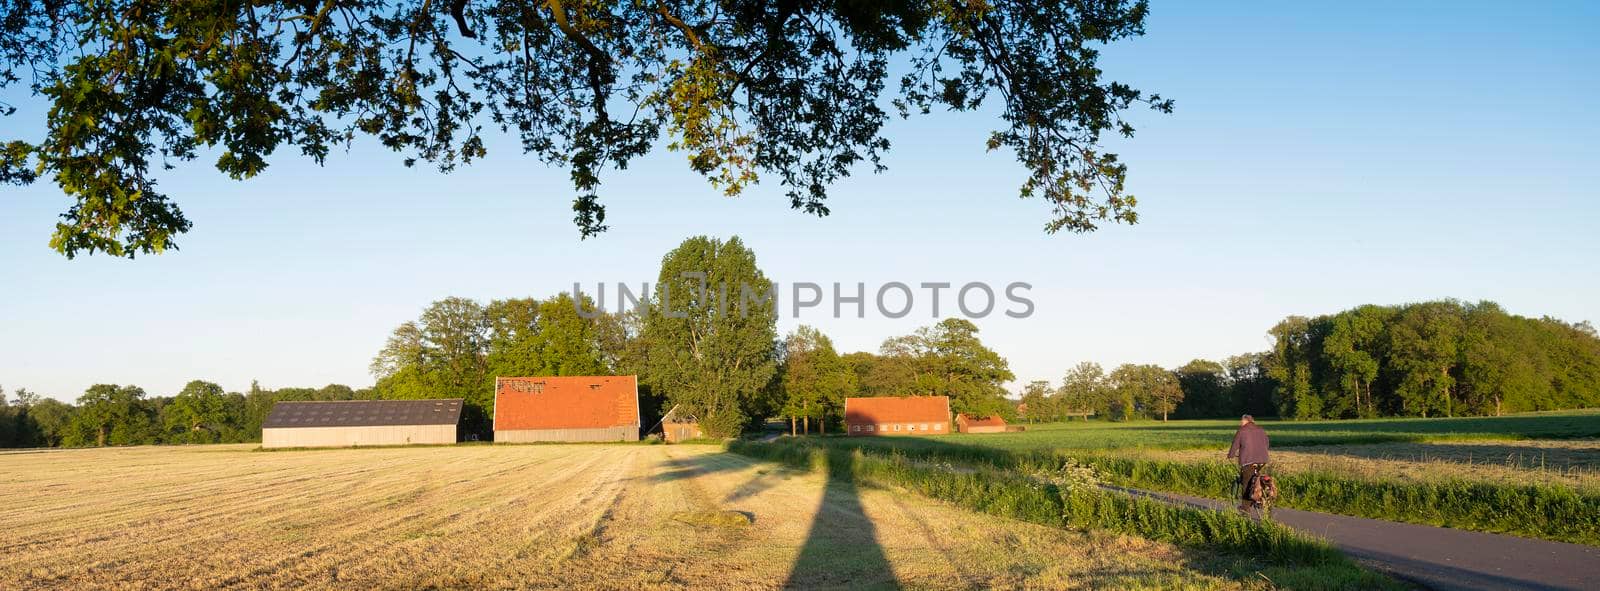 man rides bike towards old barns and farm at sunset in rural area of twente near oldenzaal in the netherlands